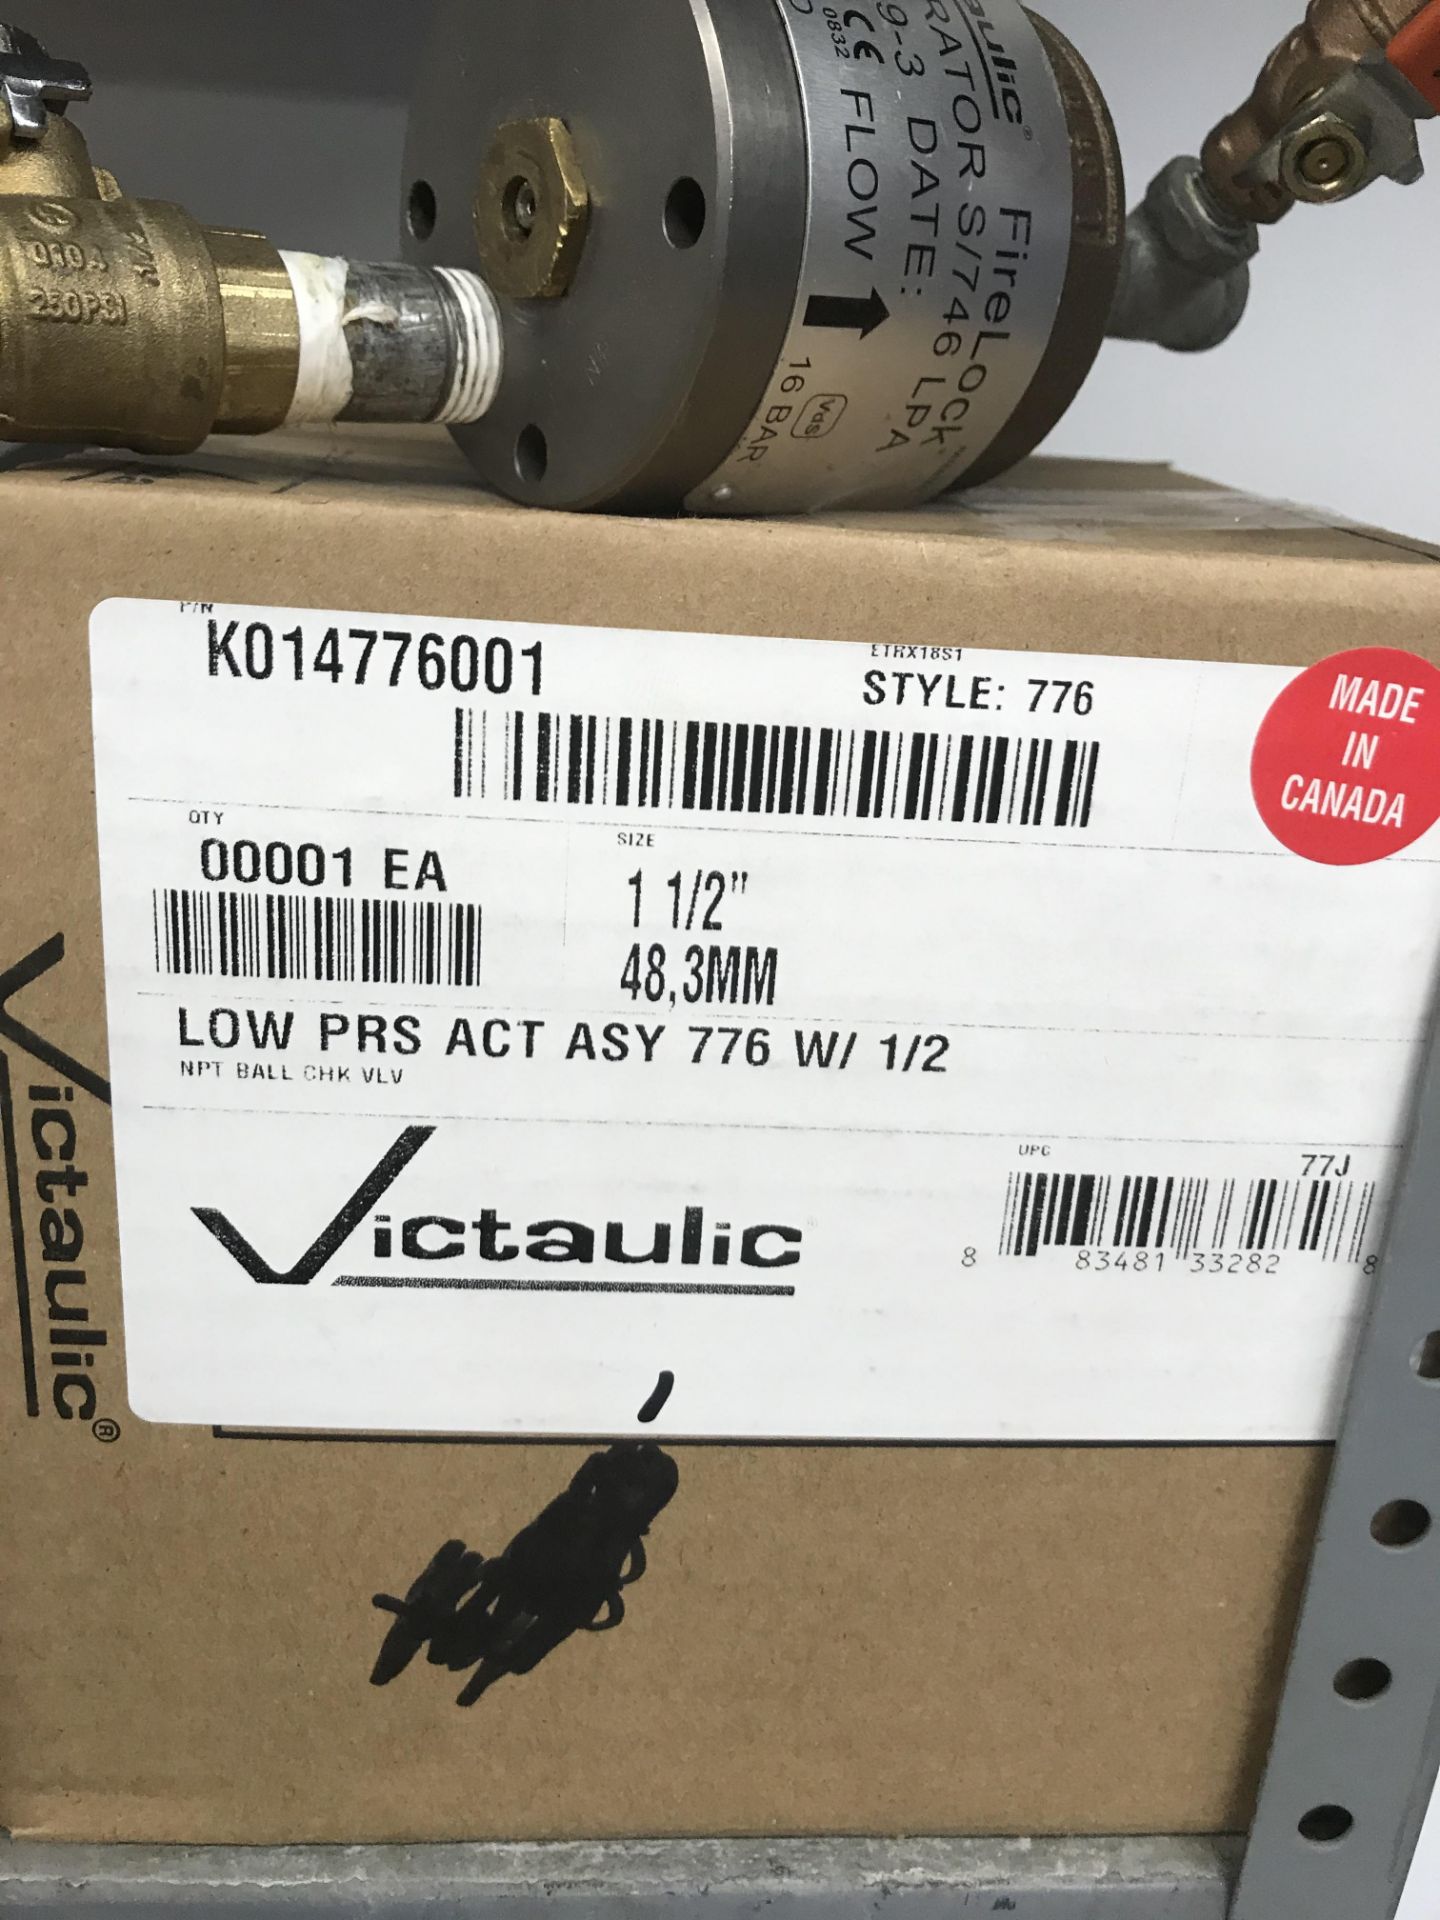 {LOT} On 1 Shelf c/o: Viking Voice Alarms, Relief Valve Repair Kit, Valves, Victaulic - Image 4 of 6